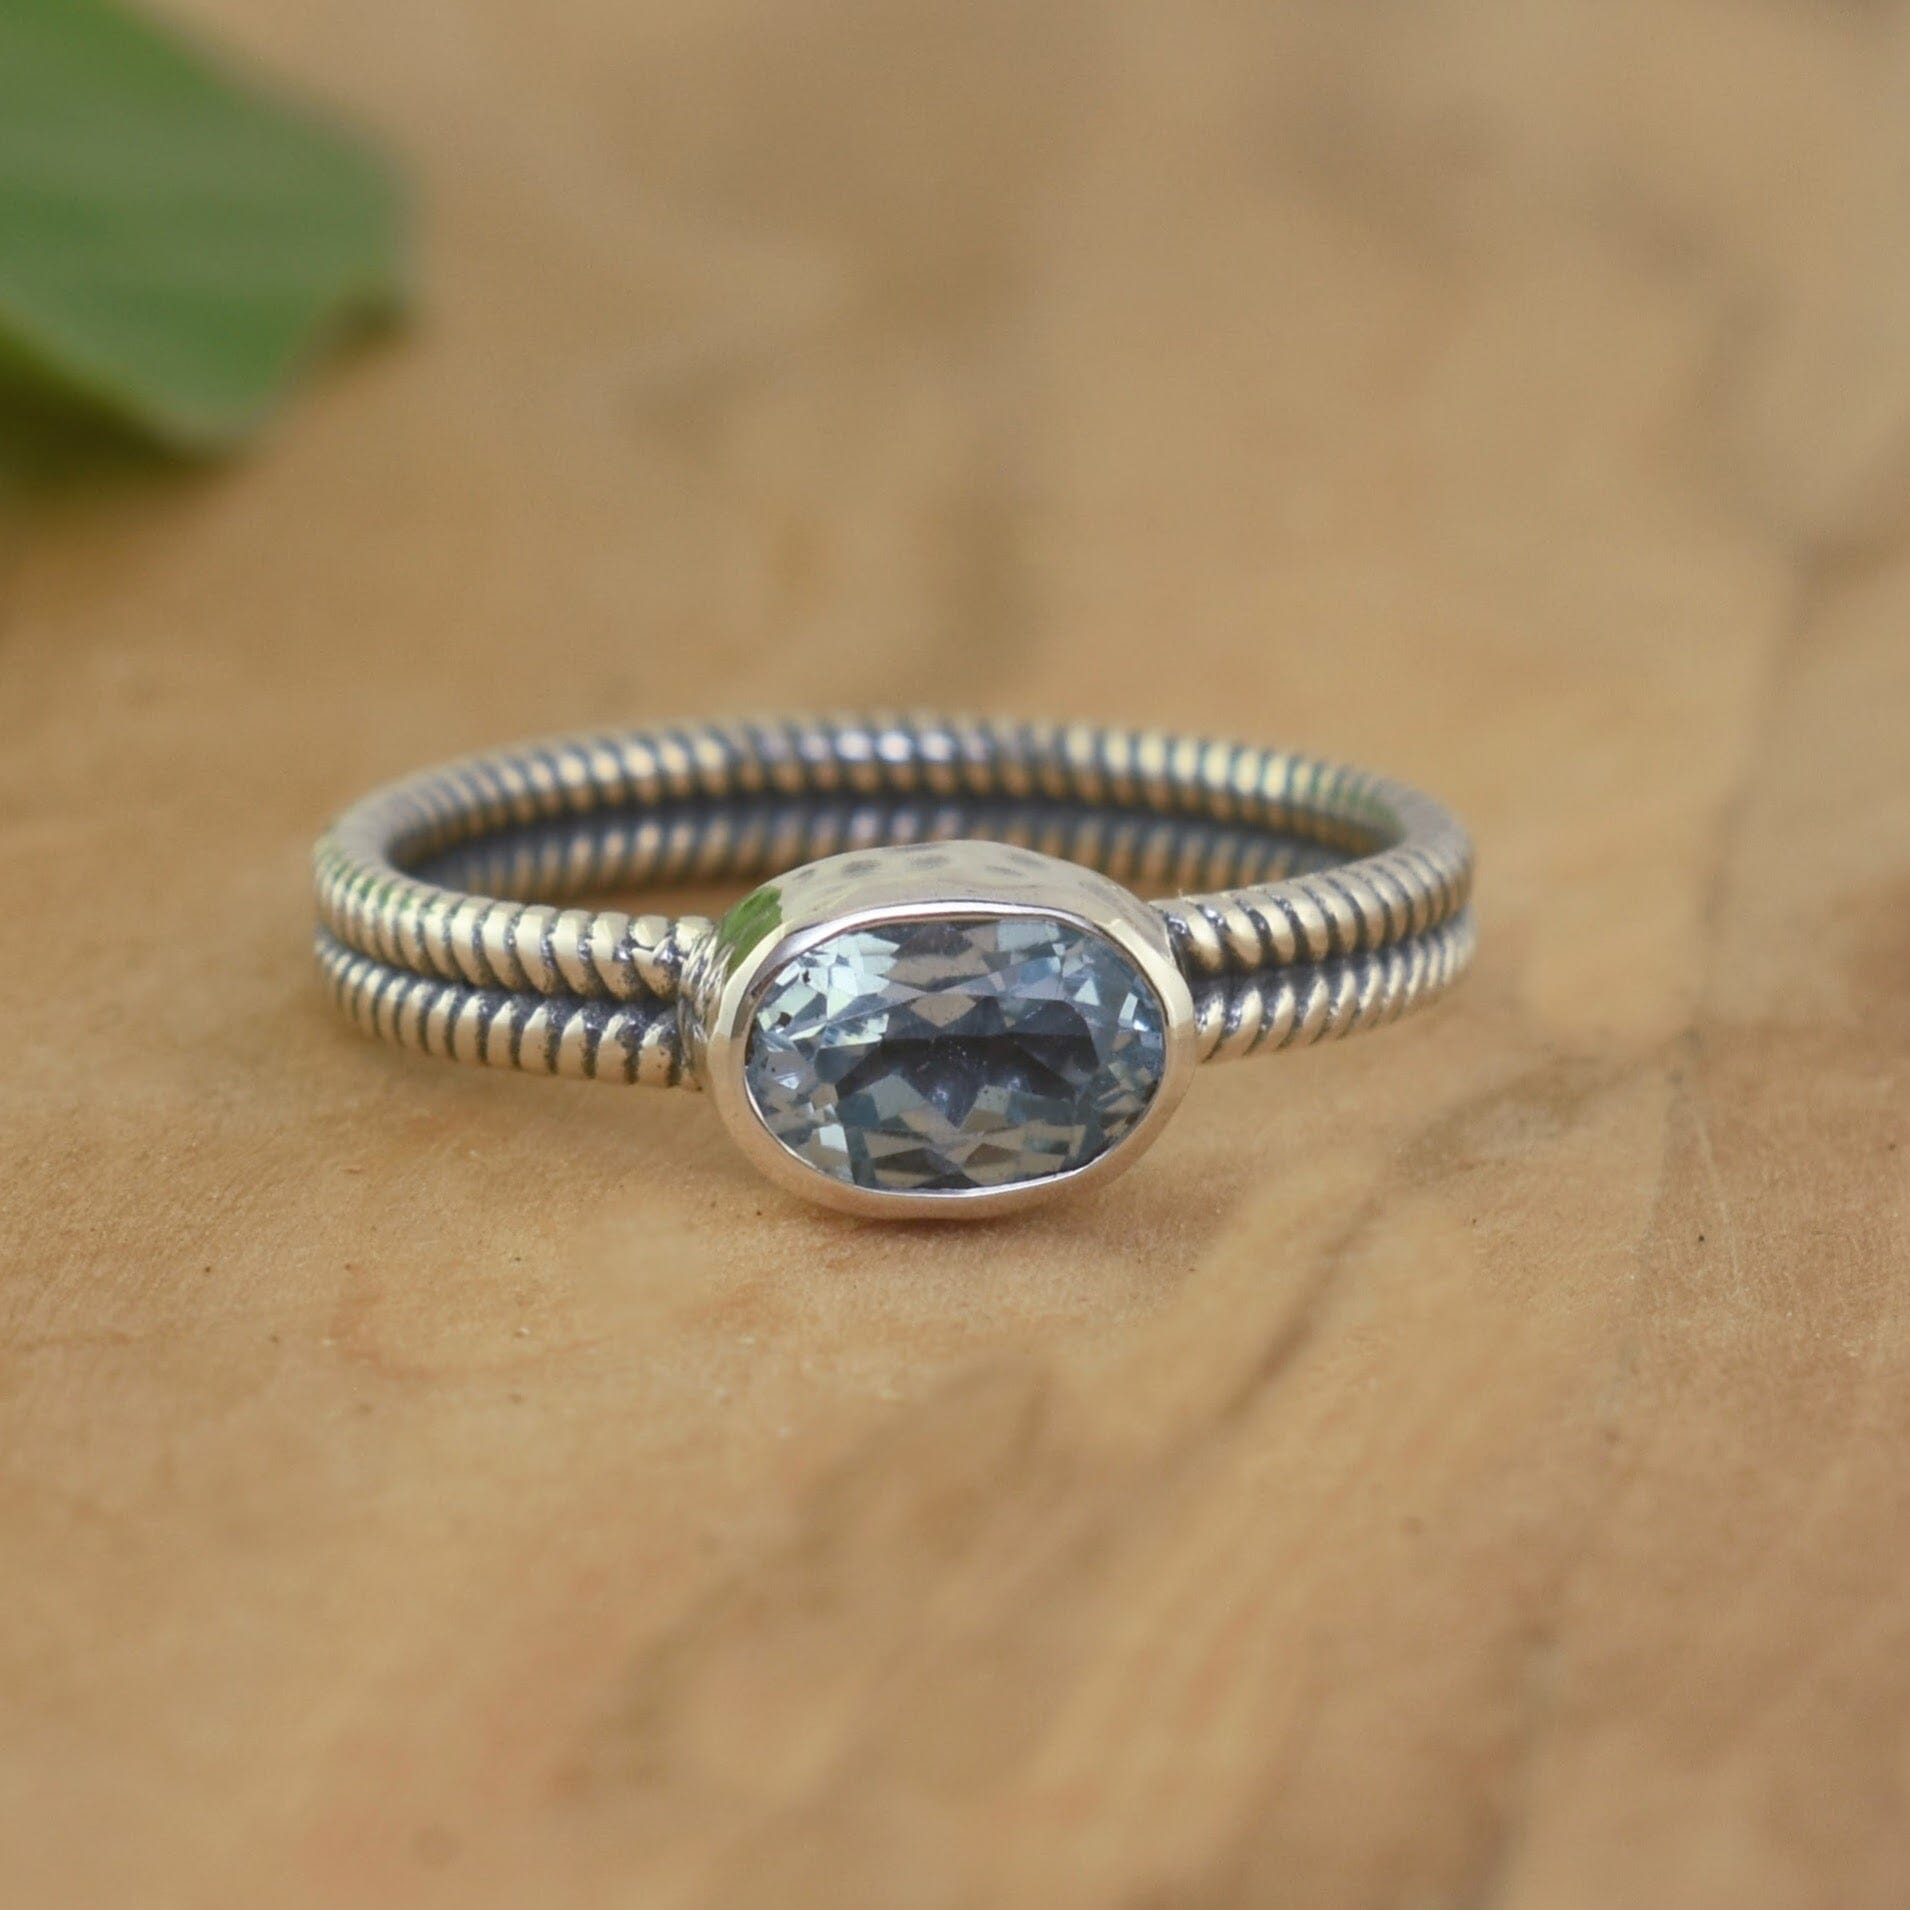 Handcrafted sterling silver ring with genuine blue topaz stone